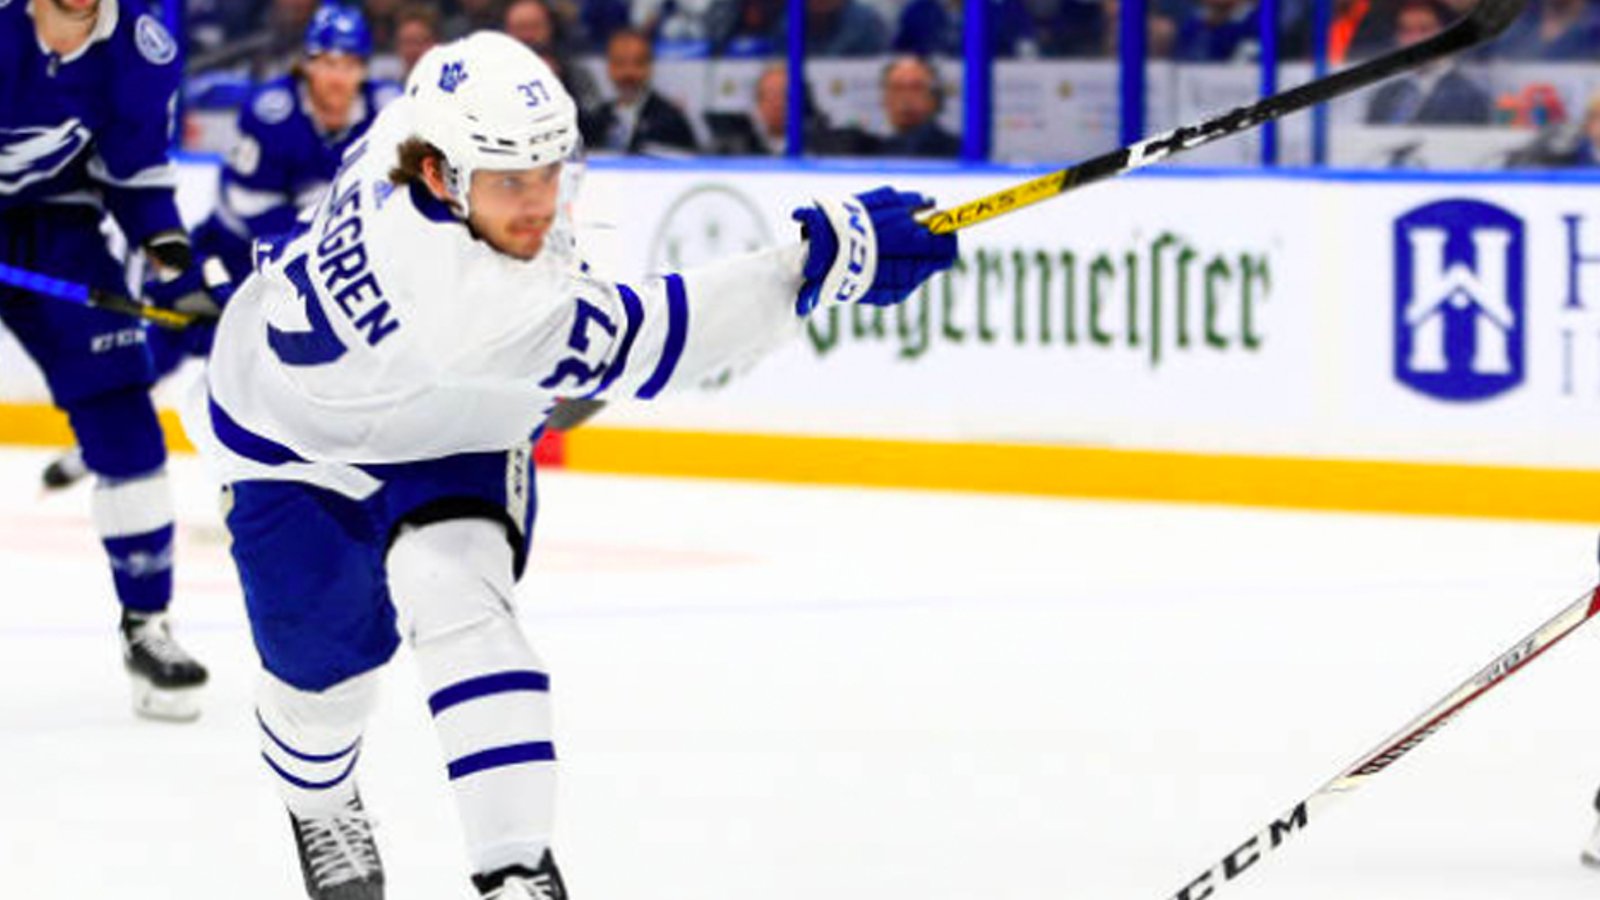 Leafs drop rookie Liljegren, replace him with Hollowell